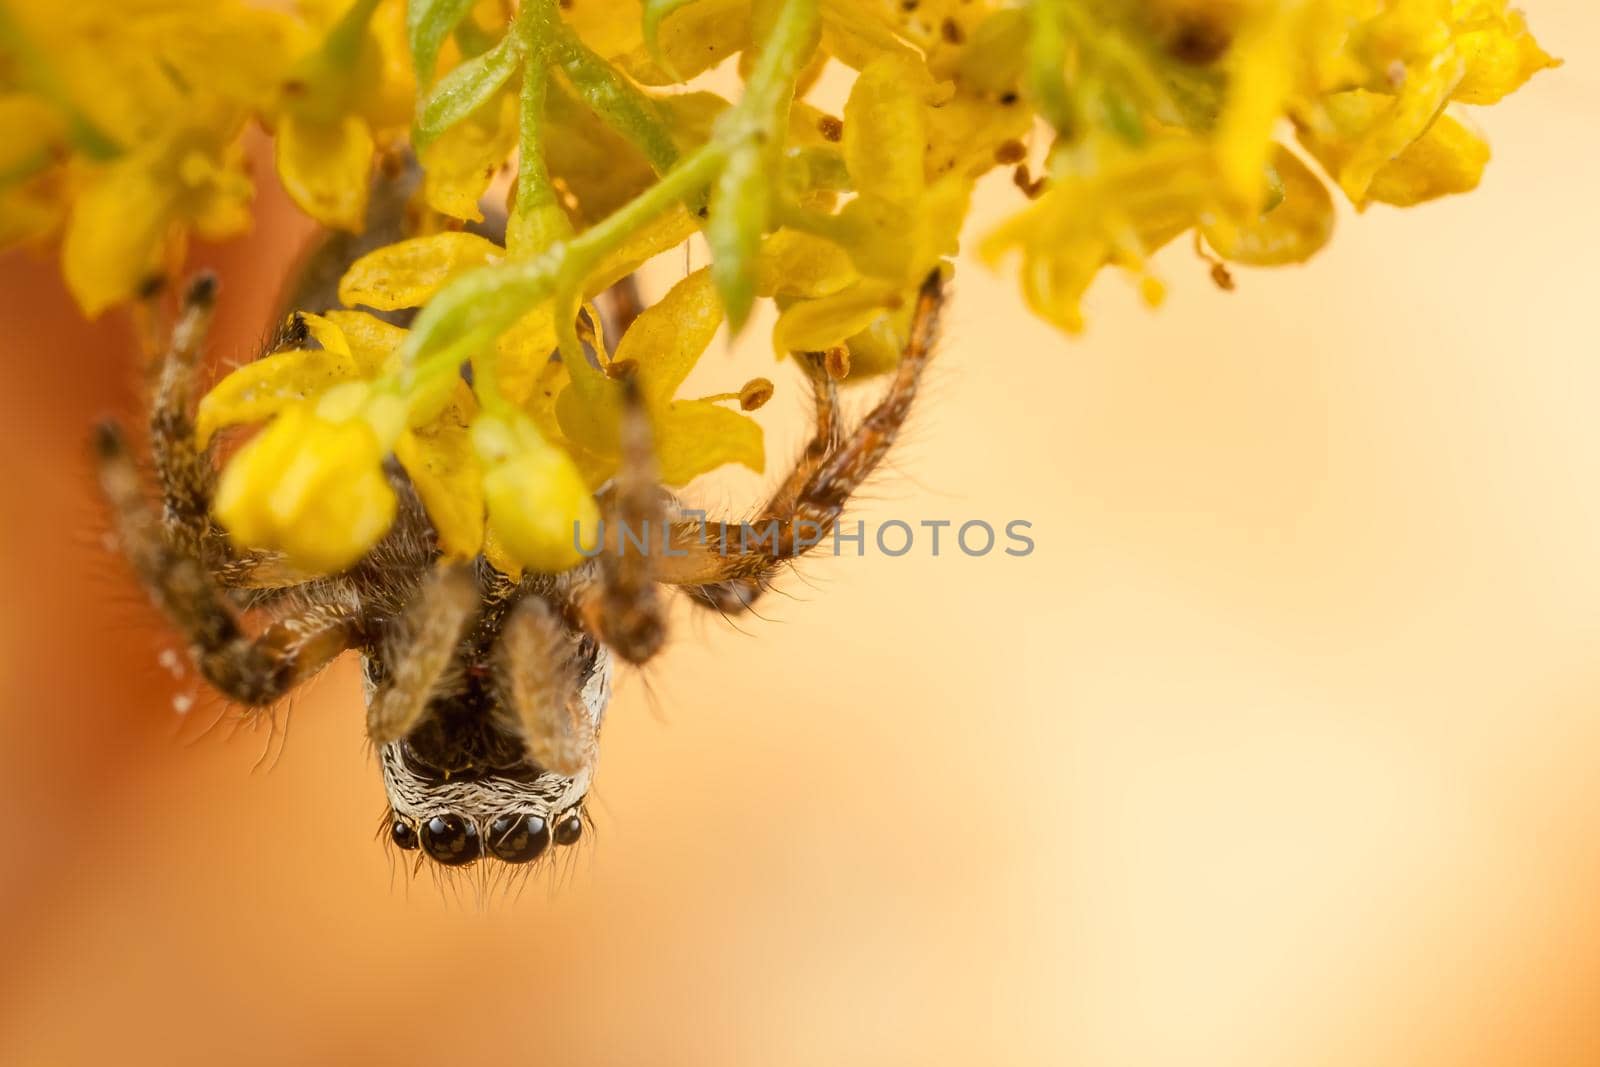 Jumping spider and yellow blossom. Bottom view